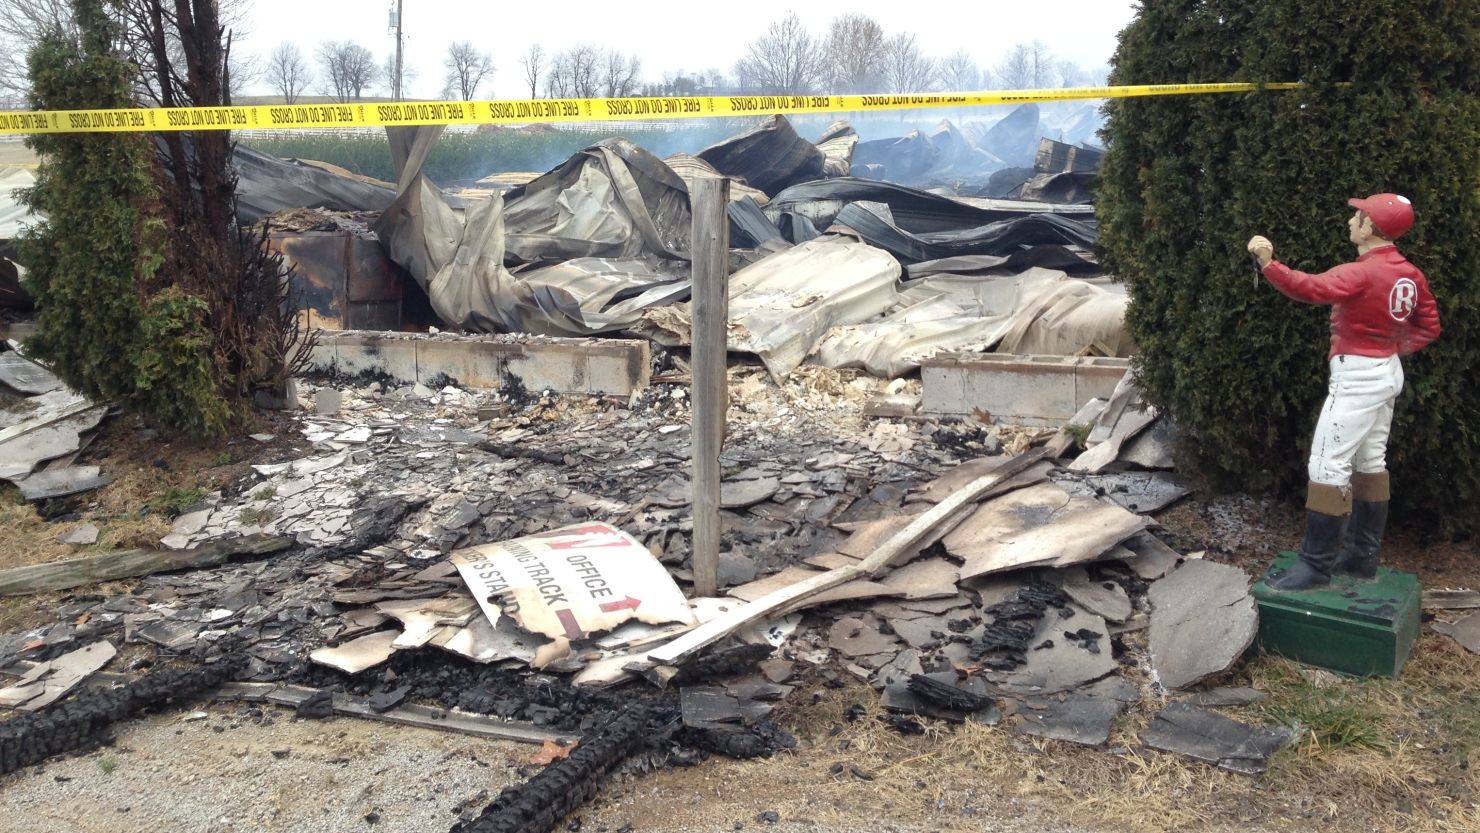 Debris covers the ground after a fire at the Mercury Equine Center outside Lexington, Kentucky. 